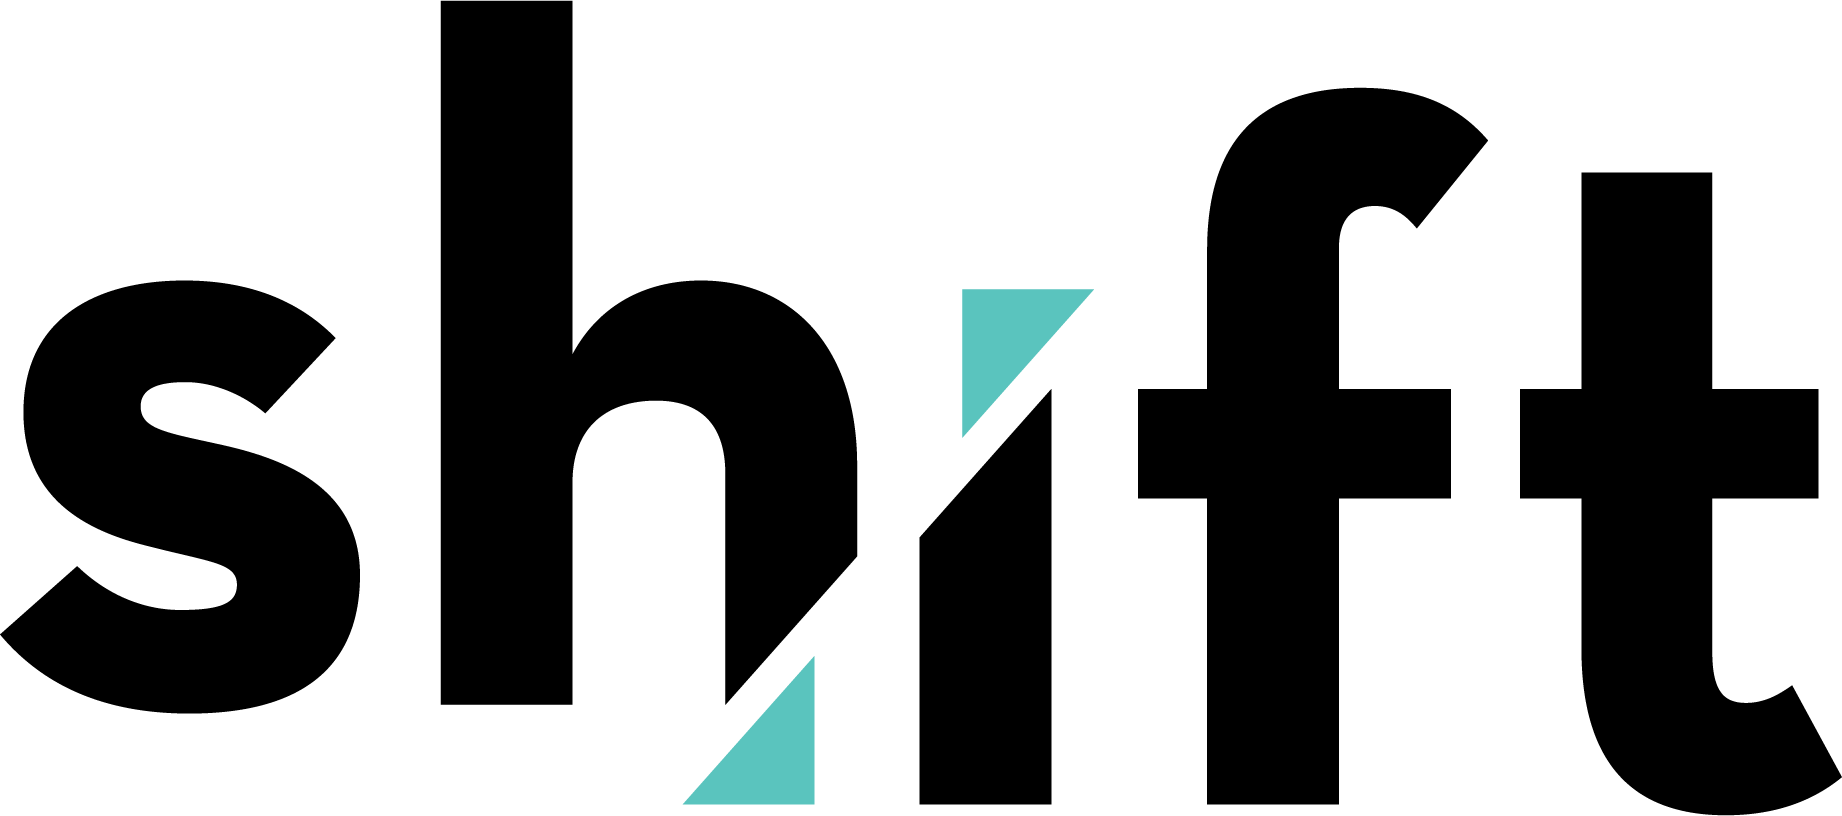 Shift Logo - Marketing Agency for Brand, Digital, and Video – Shift Now